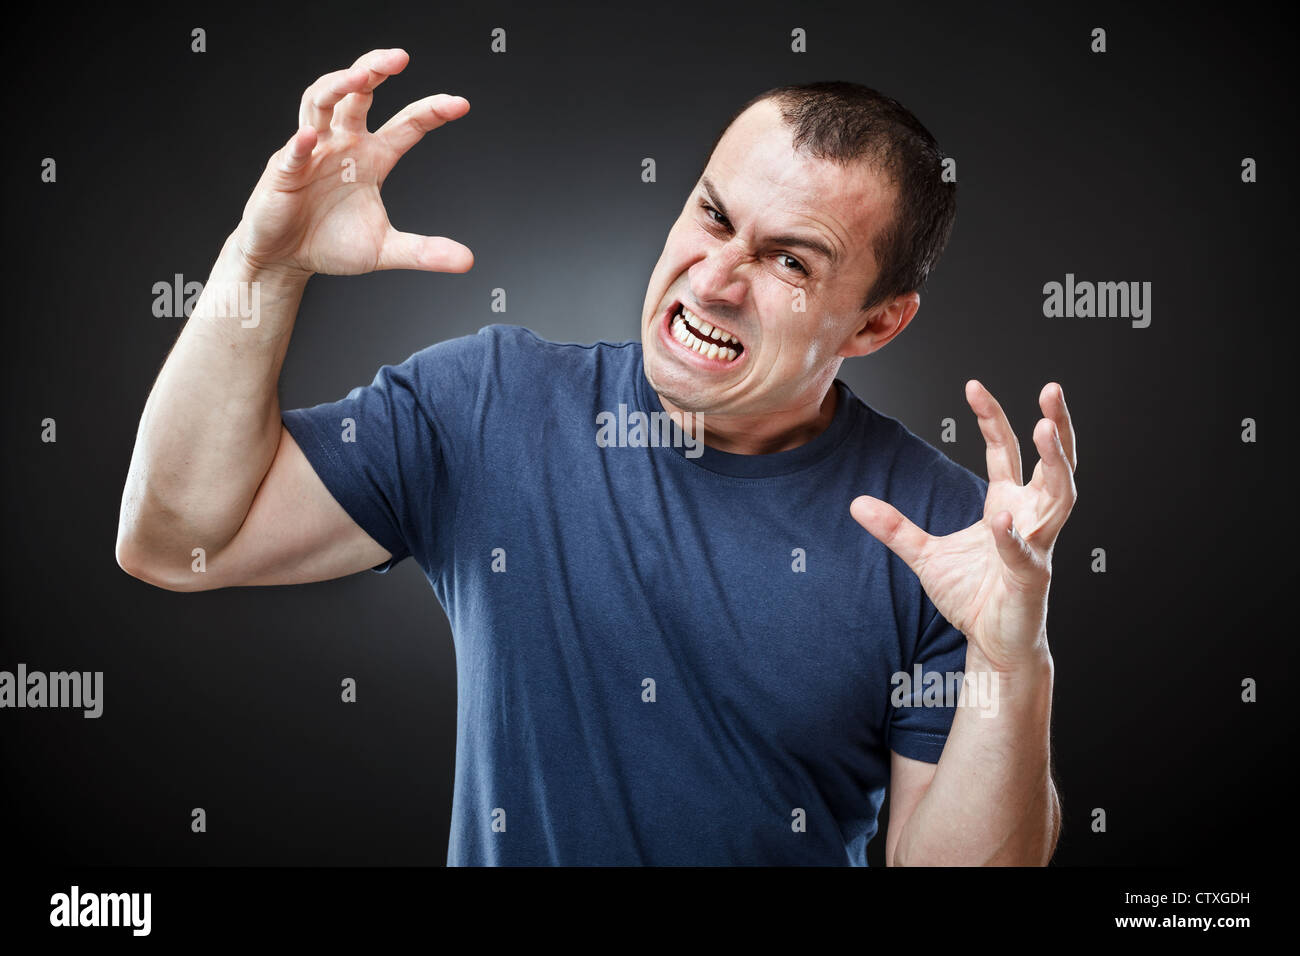 Portrait of an extremely angry young man Stock Photo